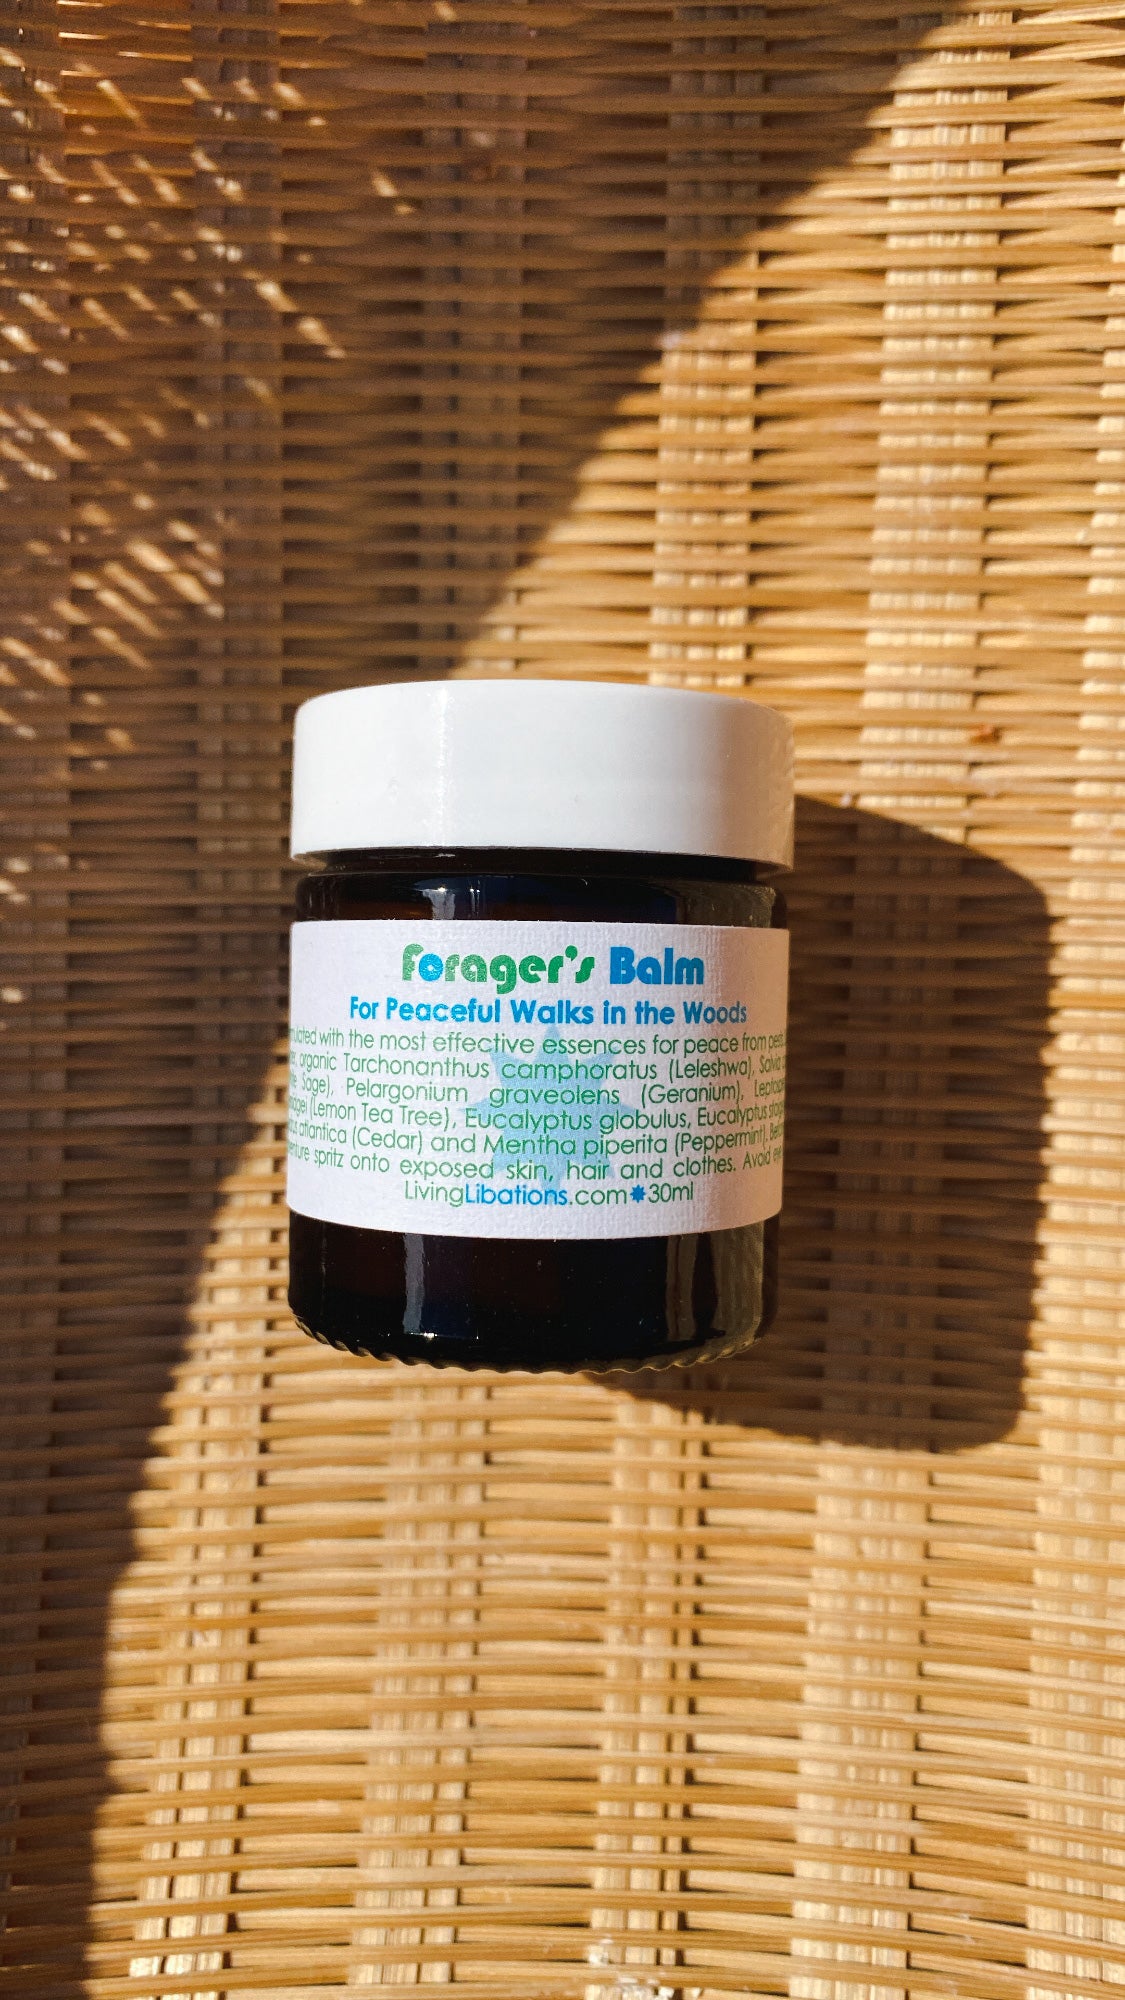 Forager's Balm